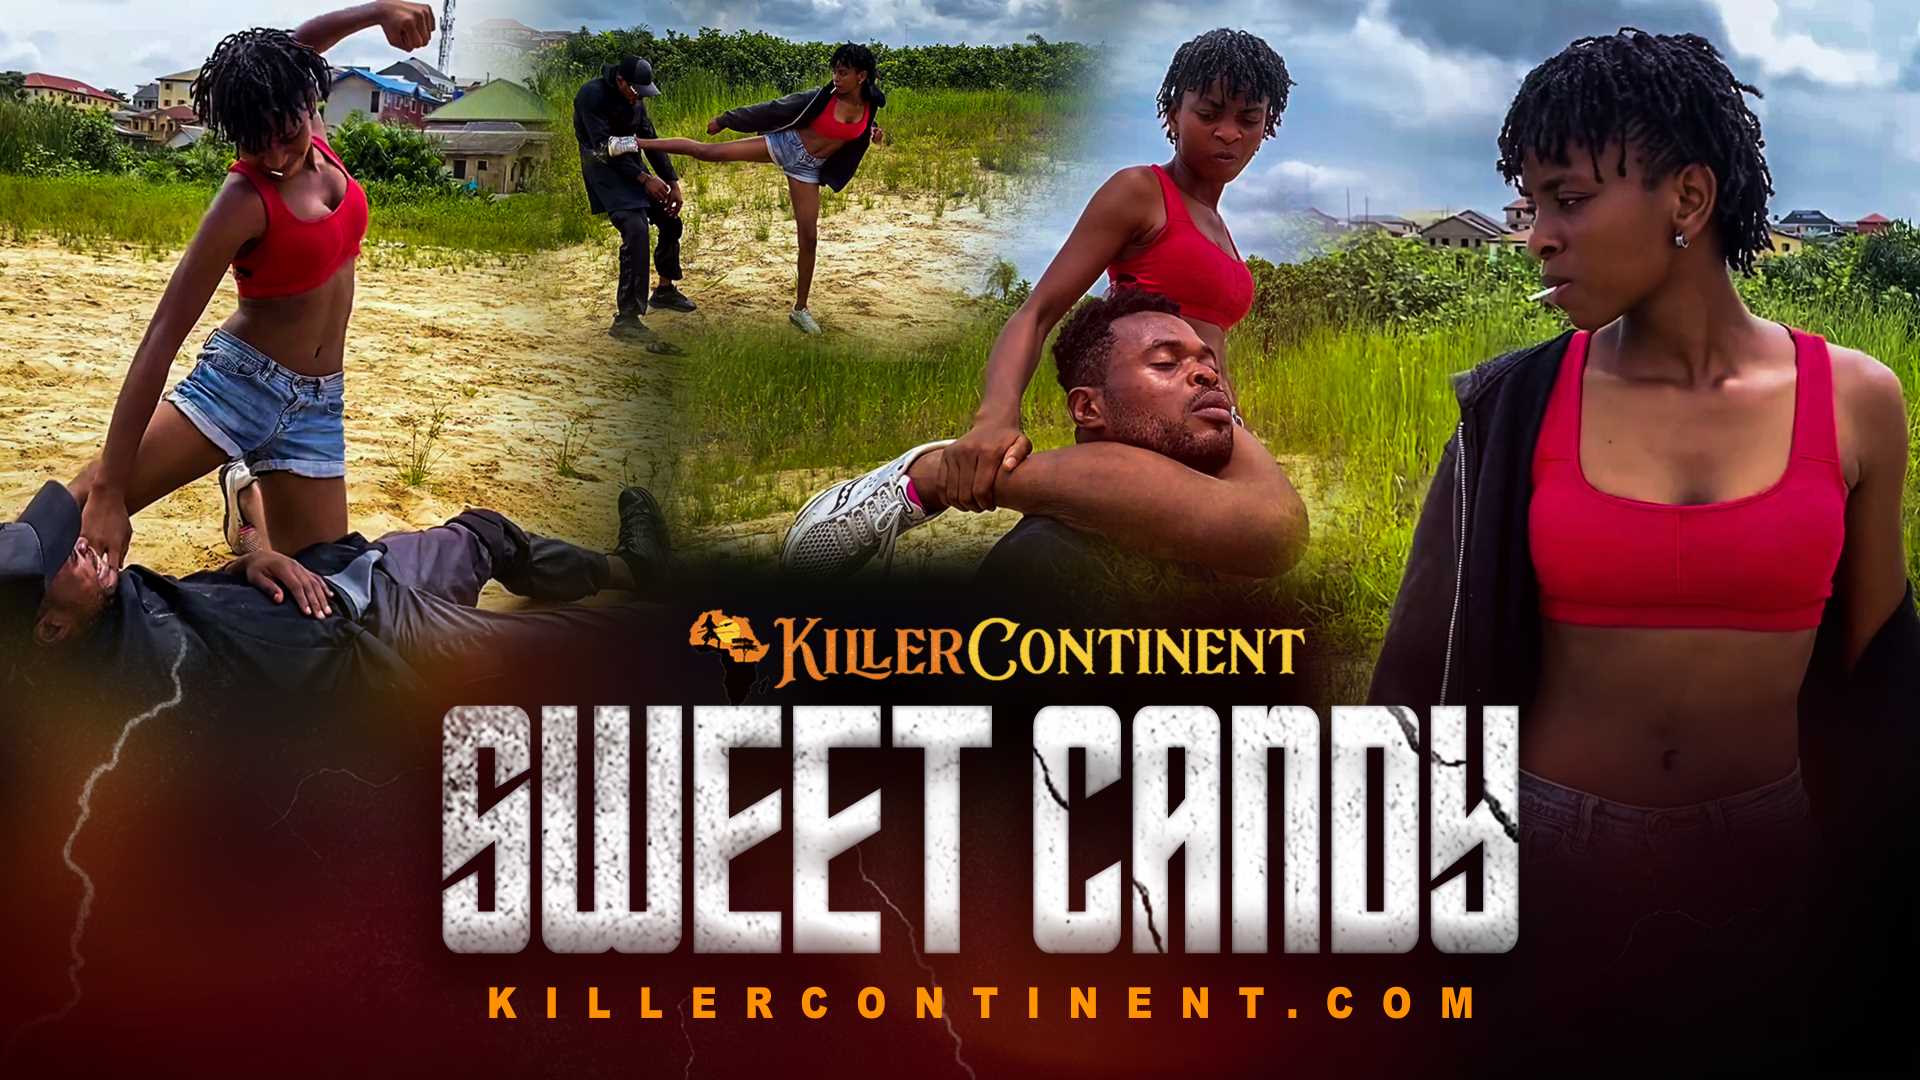 KillerContinent | Killer Continent | SWEET CANDY